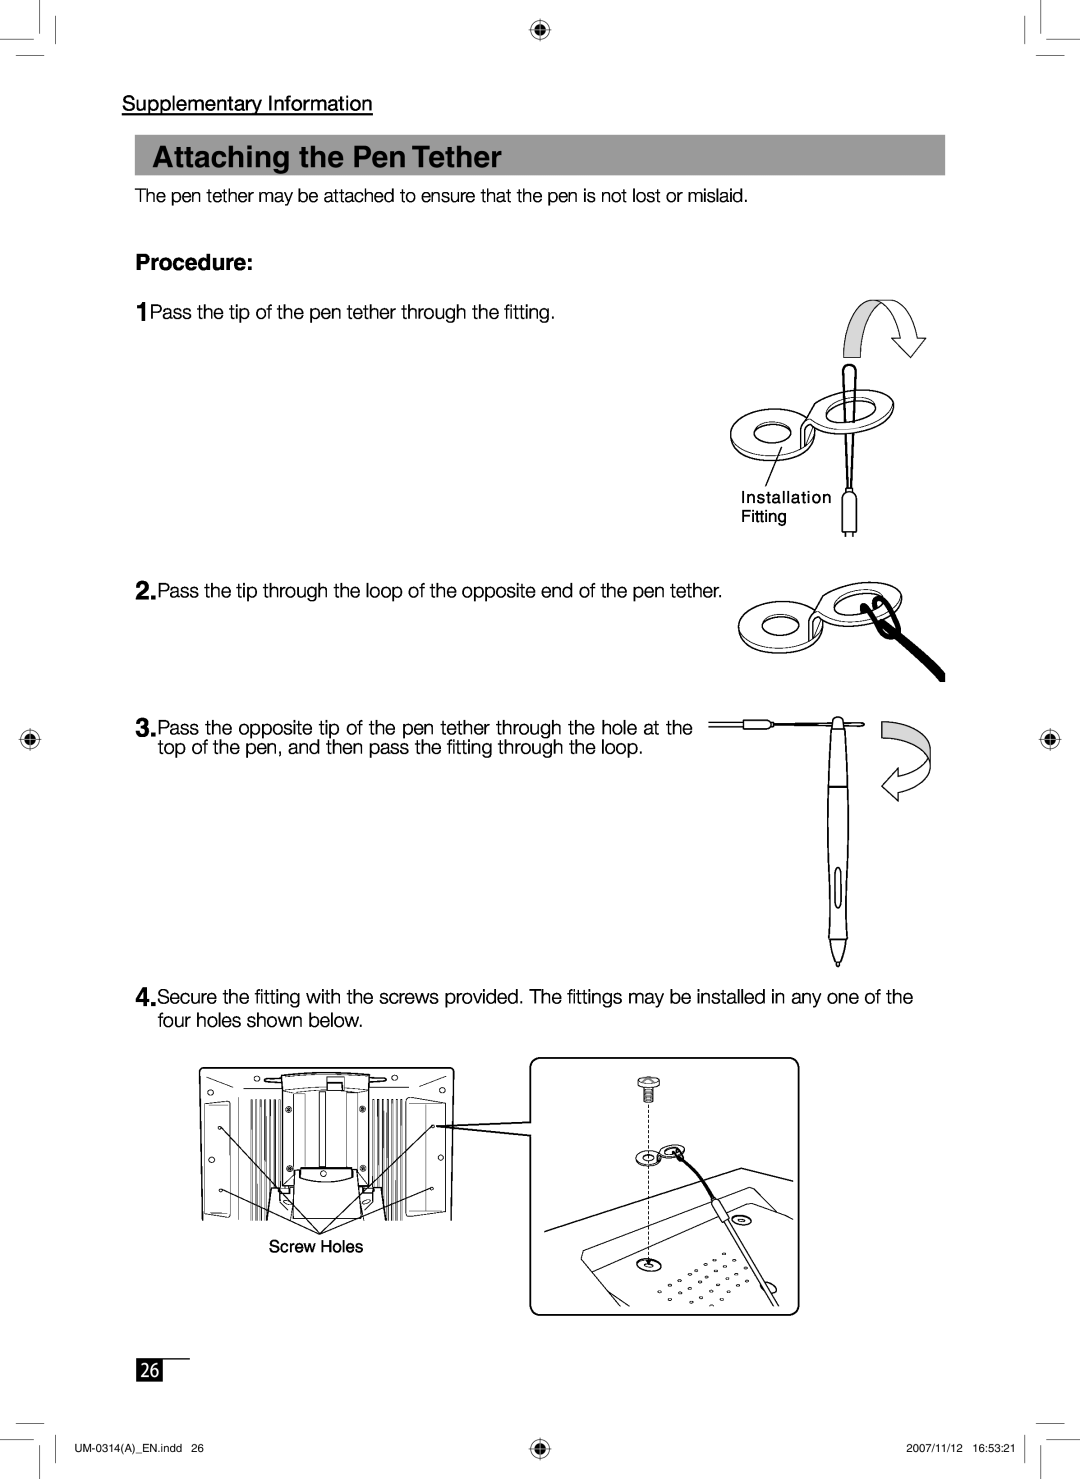 Wacom DTI-520 manual Attaching the Pen Tether, Supplementary Information 